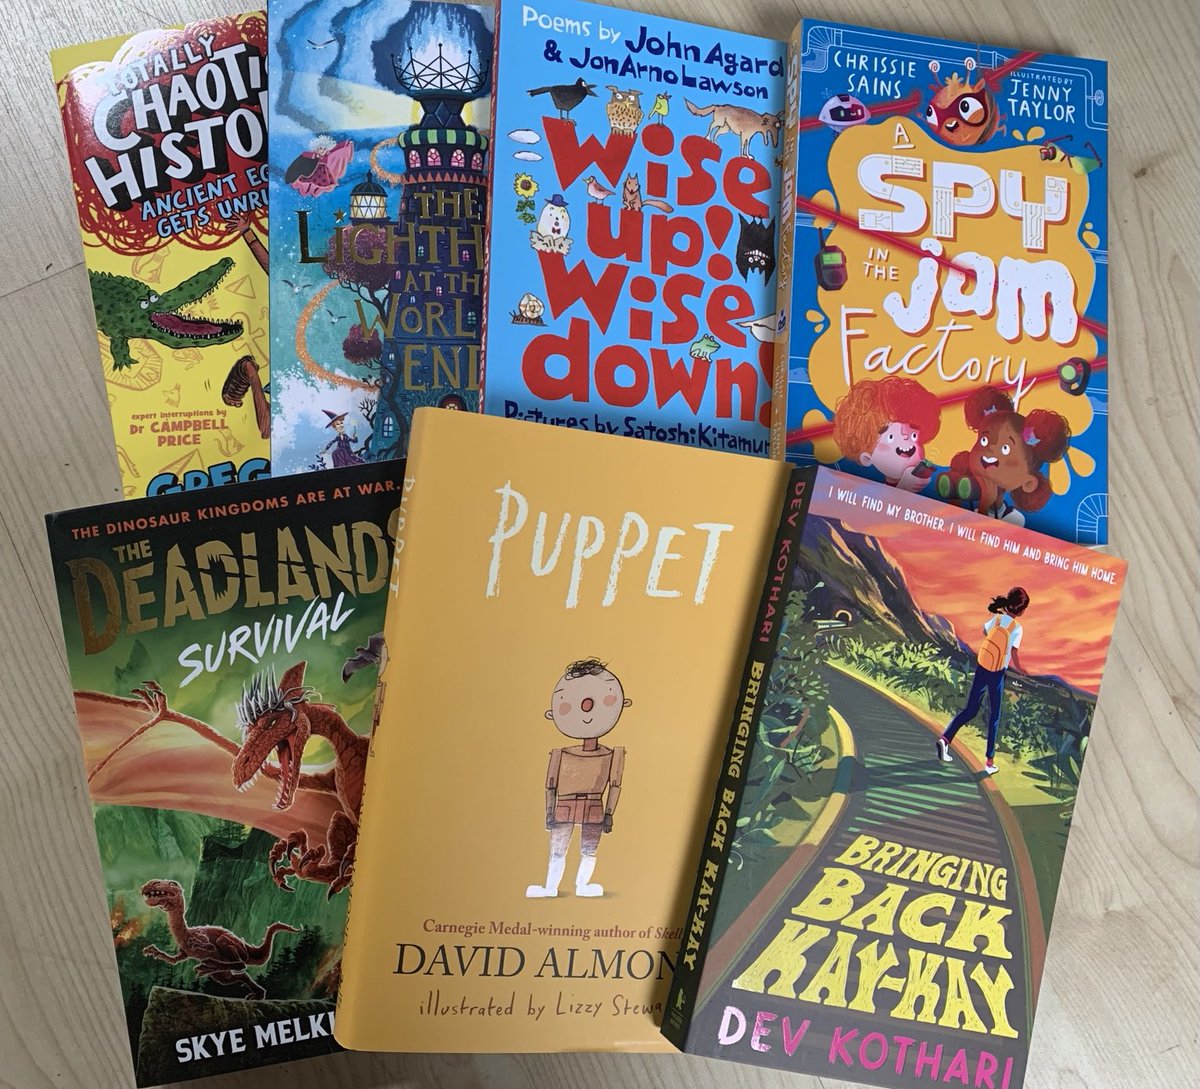 Exciting book post from ⁦@WalkerBooksUK⁩ with lots of new titles especially looking forward to reading the books by #Lovemybooks patrons ⁦@davidjalmond⁩ #Puppet and ⁦@JosephACoelho⁩ #WiseUpWiseDown